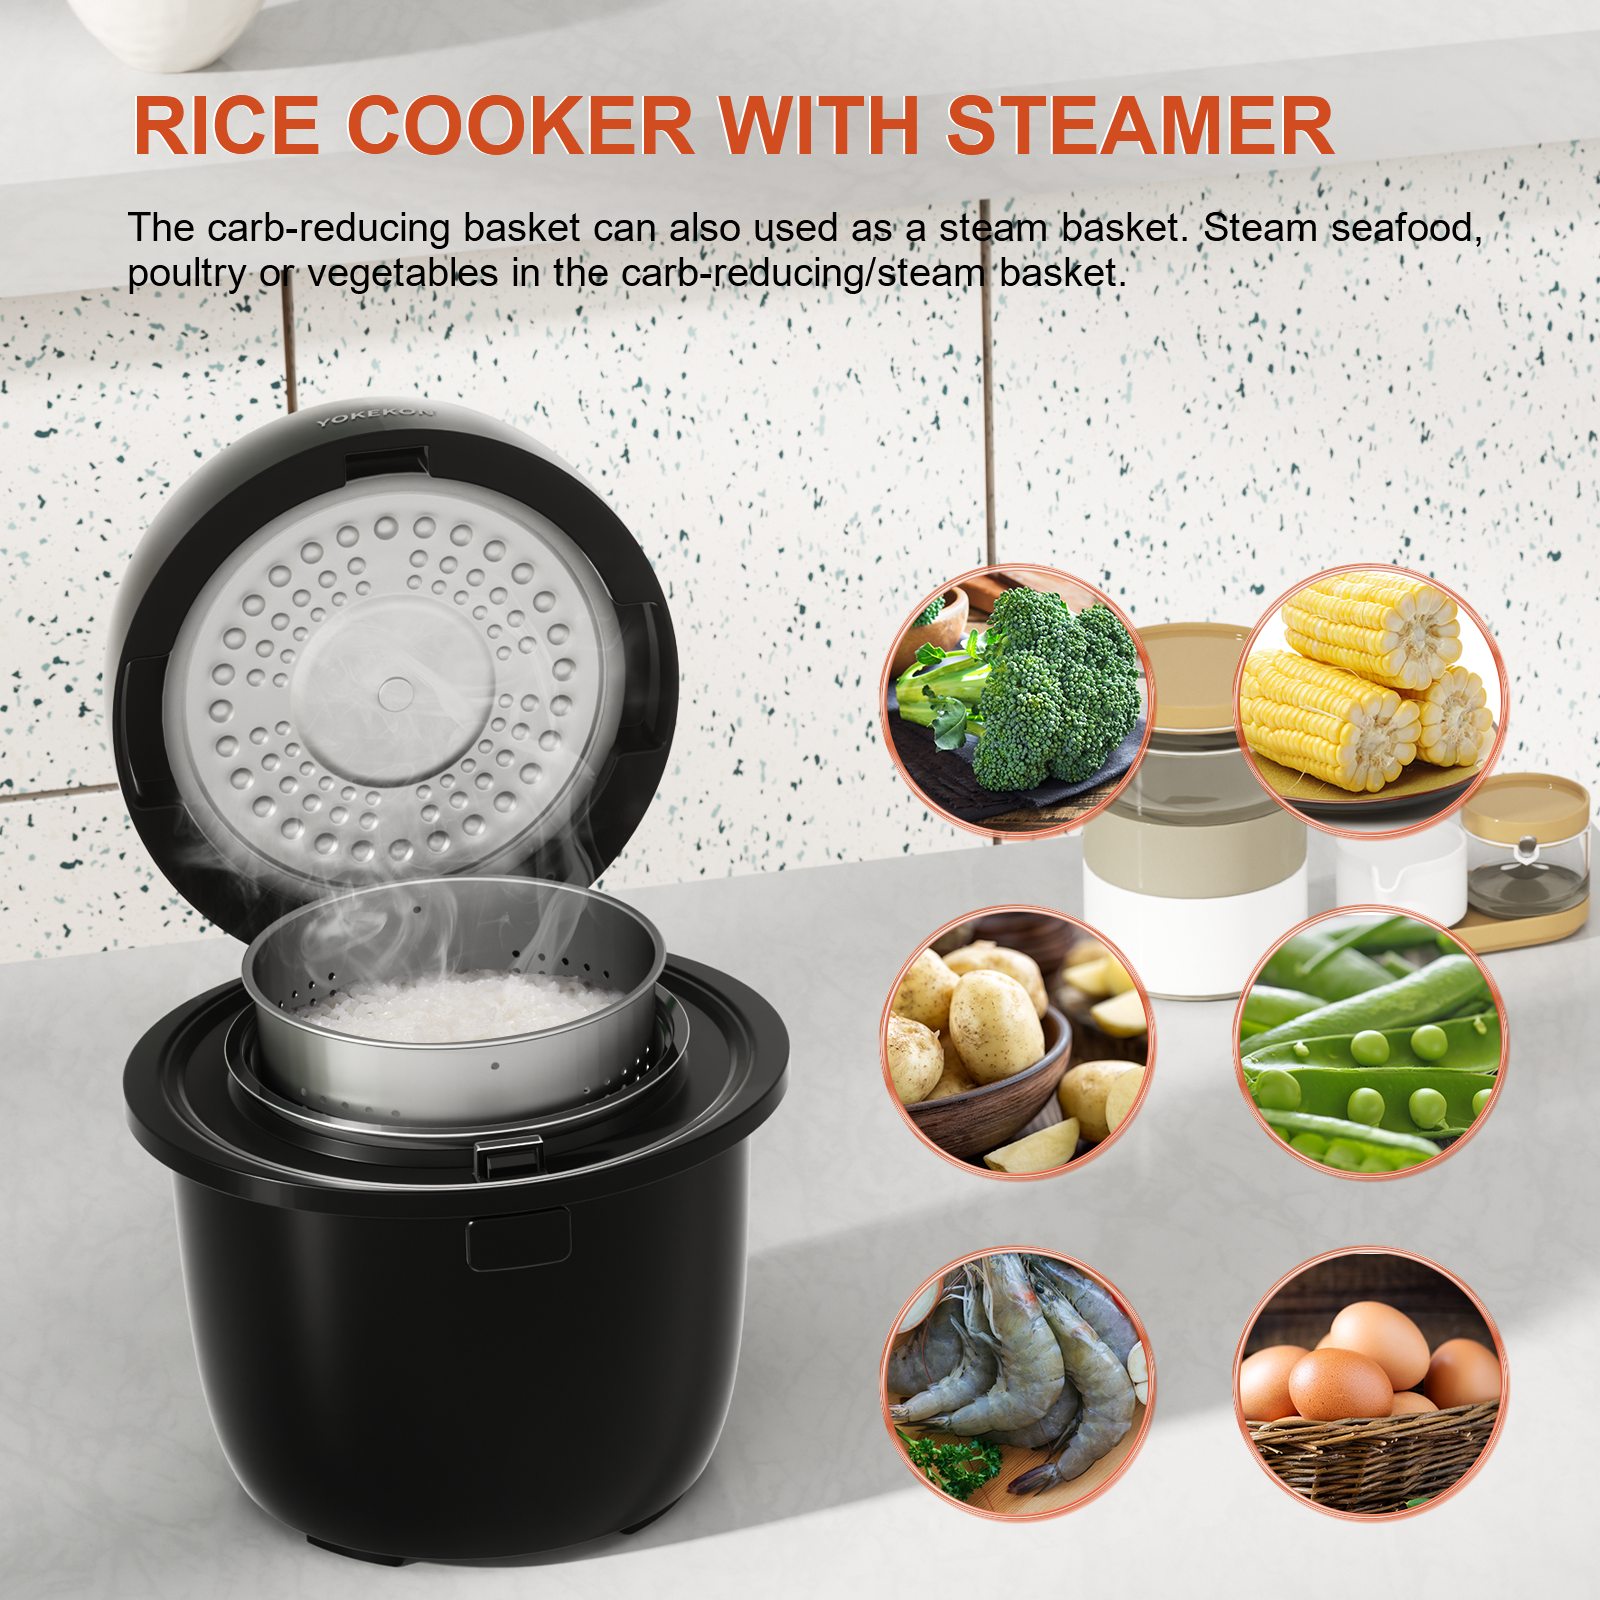 Rice Cooker Small Low Carb, YOKEKON 3 cup uncook Rice Cooker with Stainless Steel Steamer, 8-in-1 Rice Maker, Delay Timer and Auto Keep Warm Feature, Sushi, Risitto, Steamer, Cake, Black